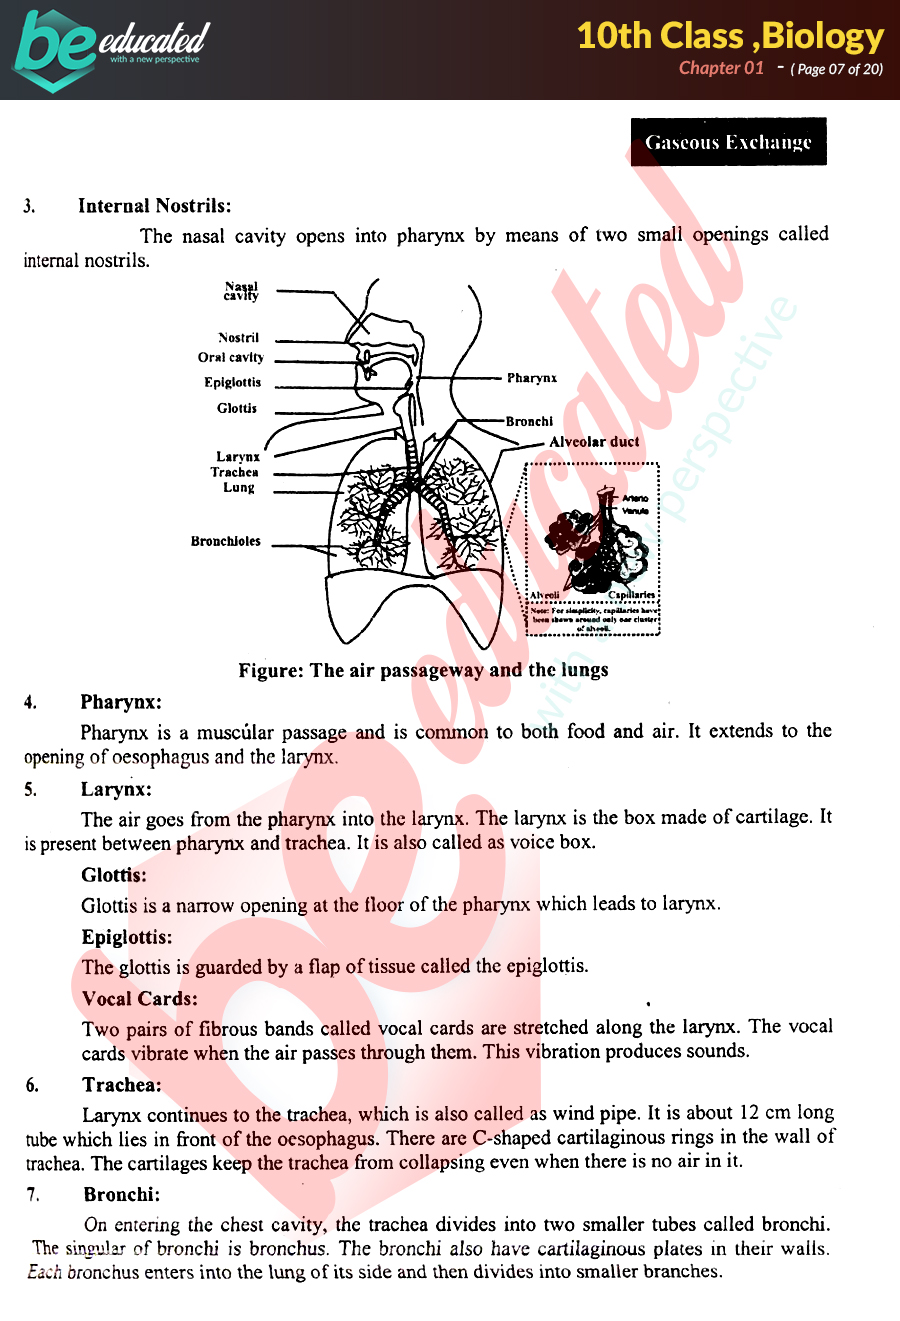 case study questions of biology class 10